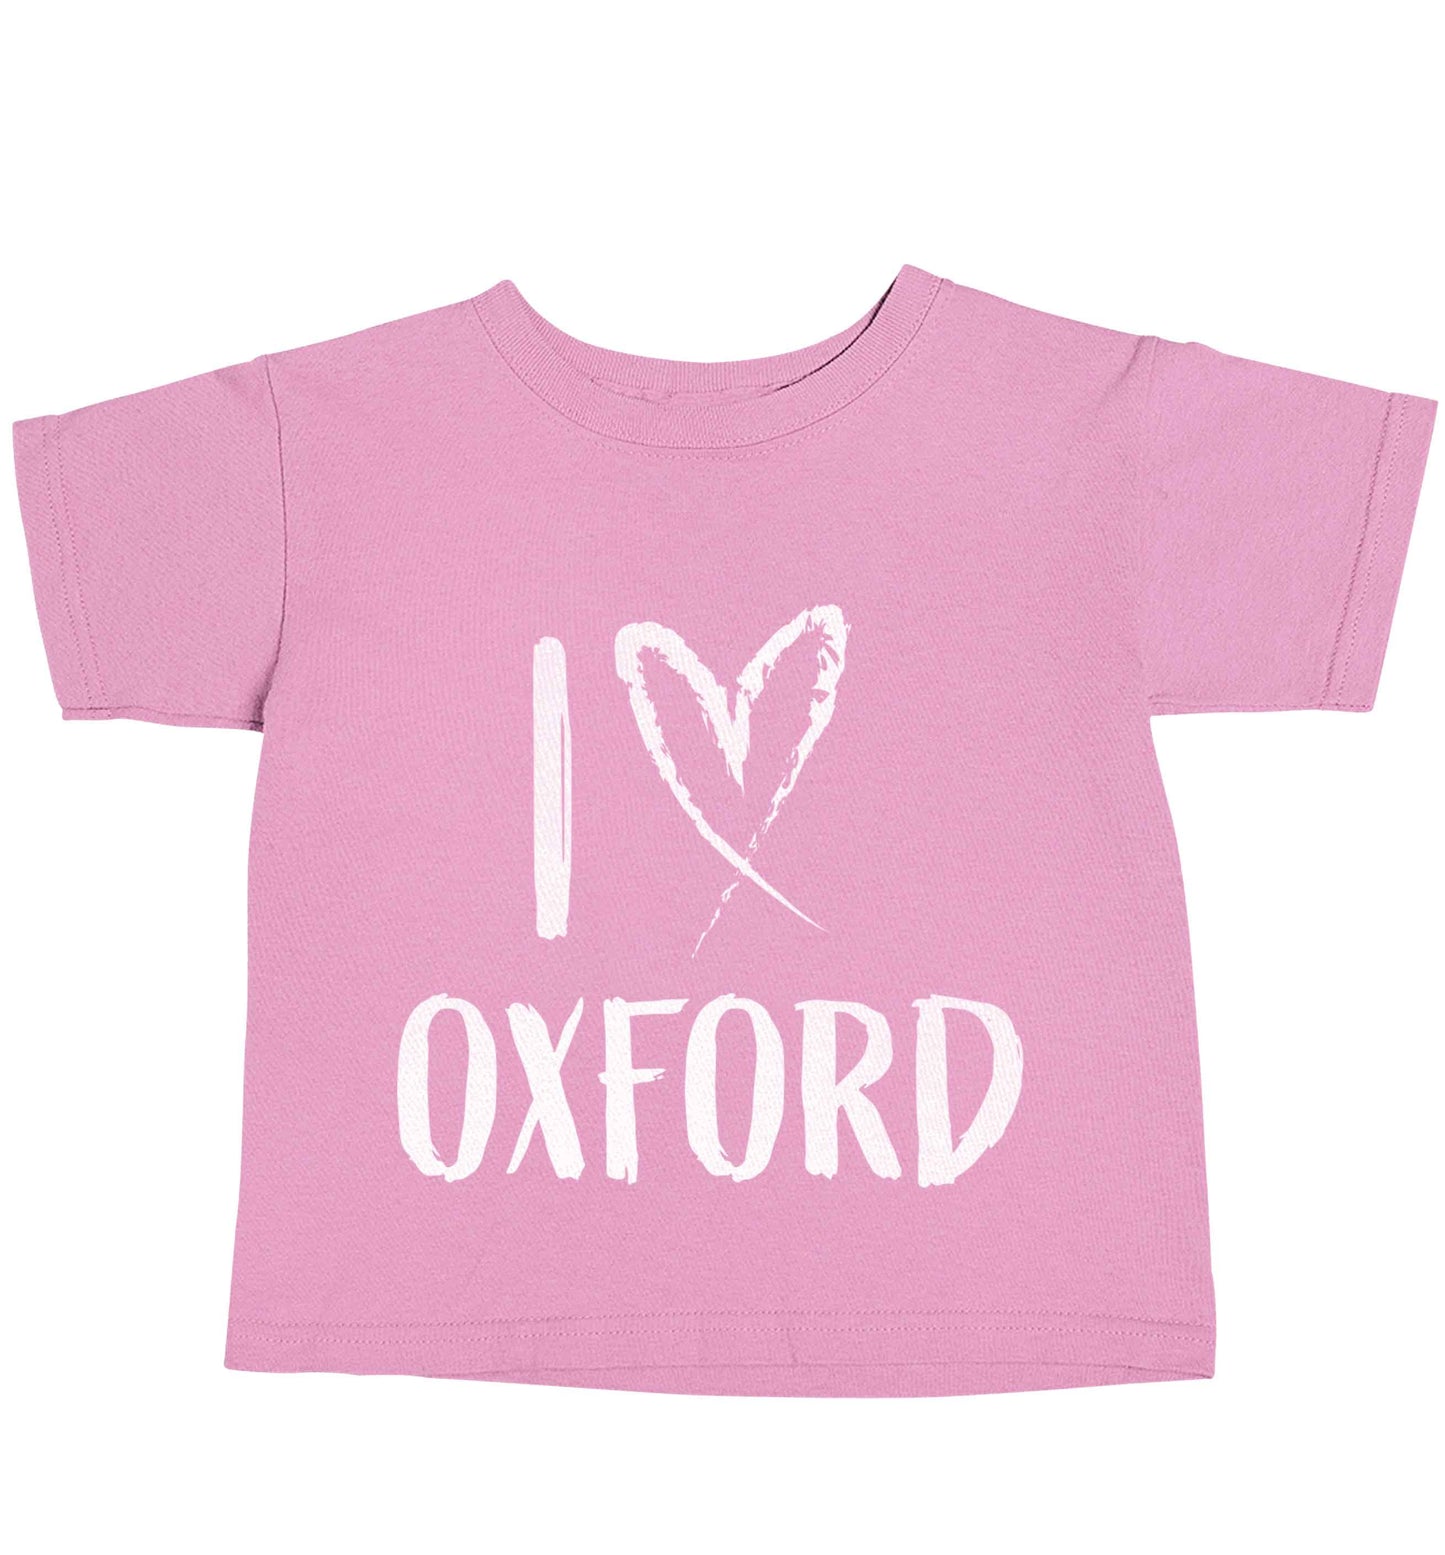 I love Oxford light pink baby toddler Tshirt 2 Years